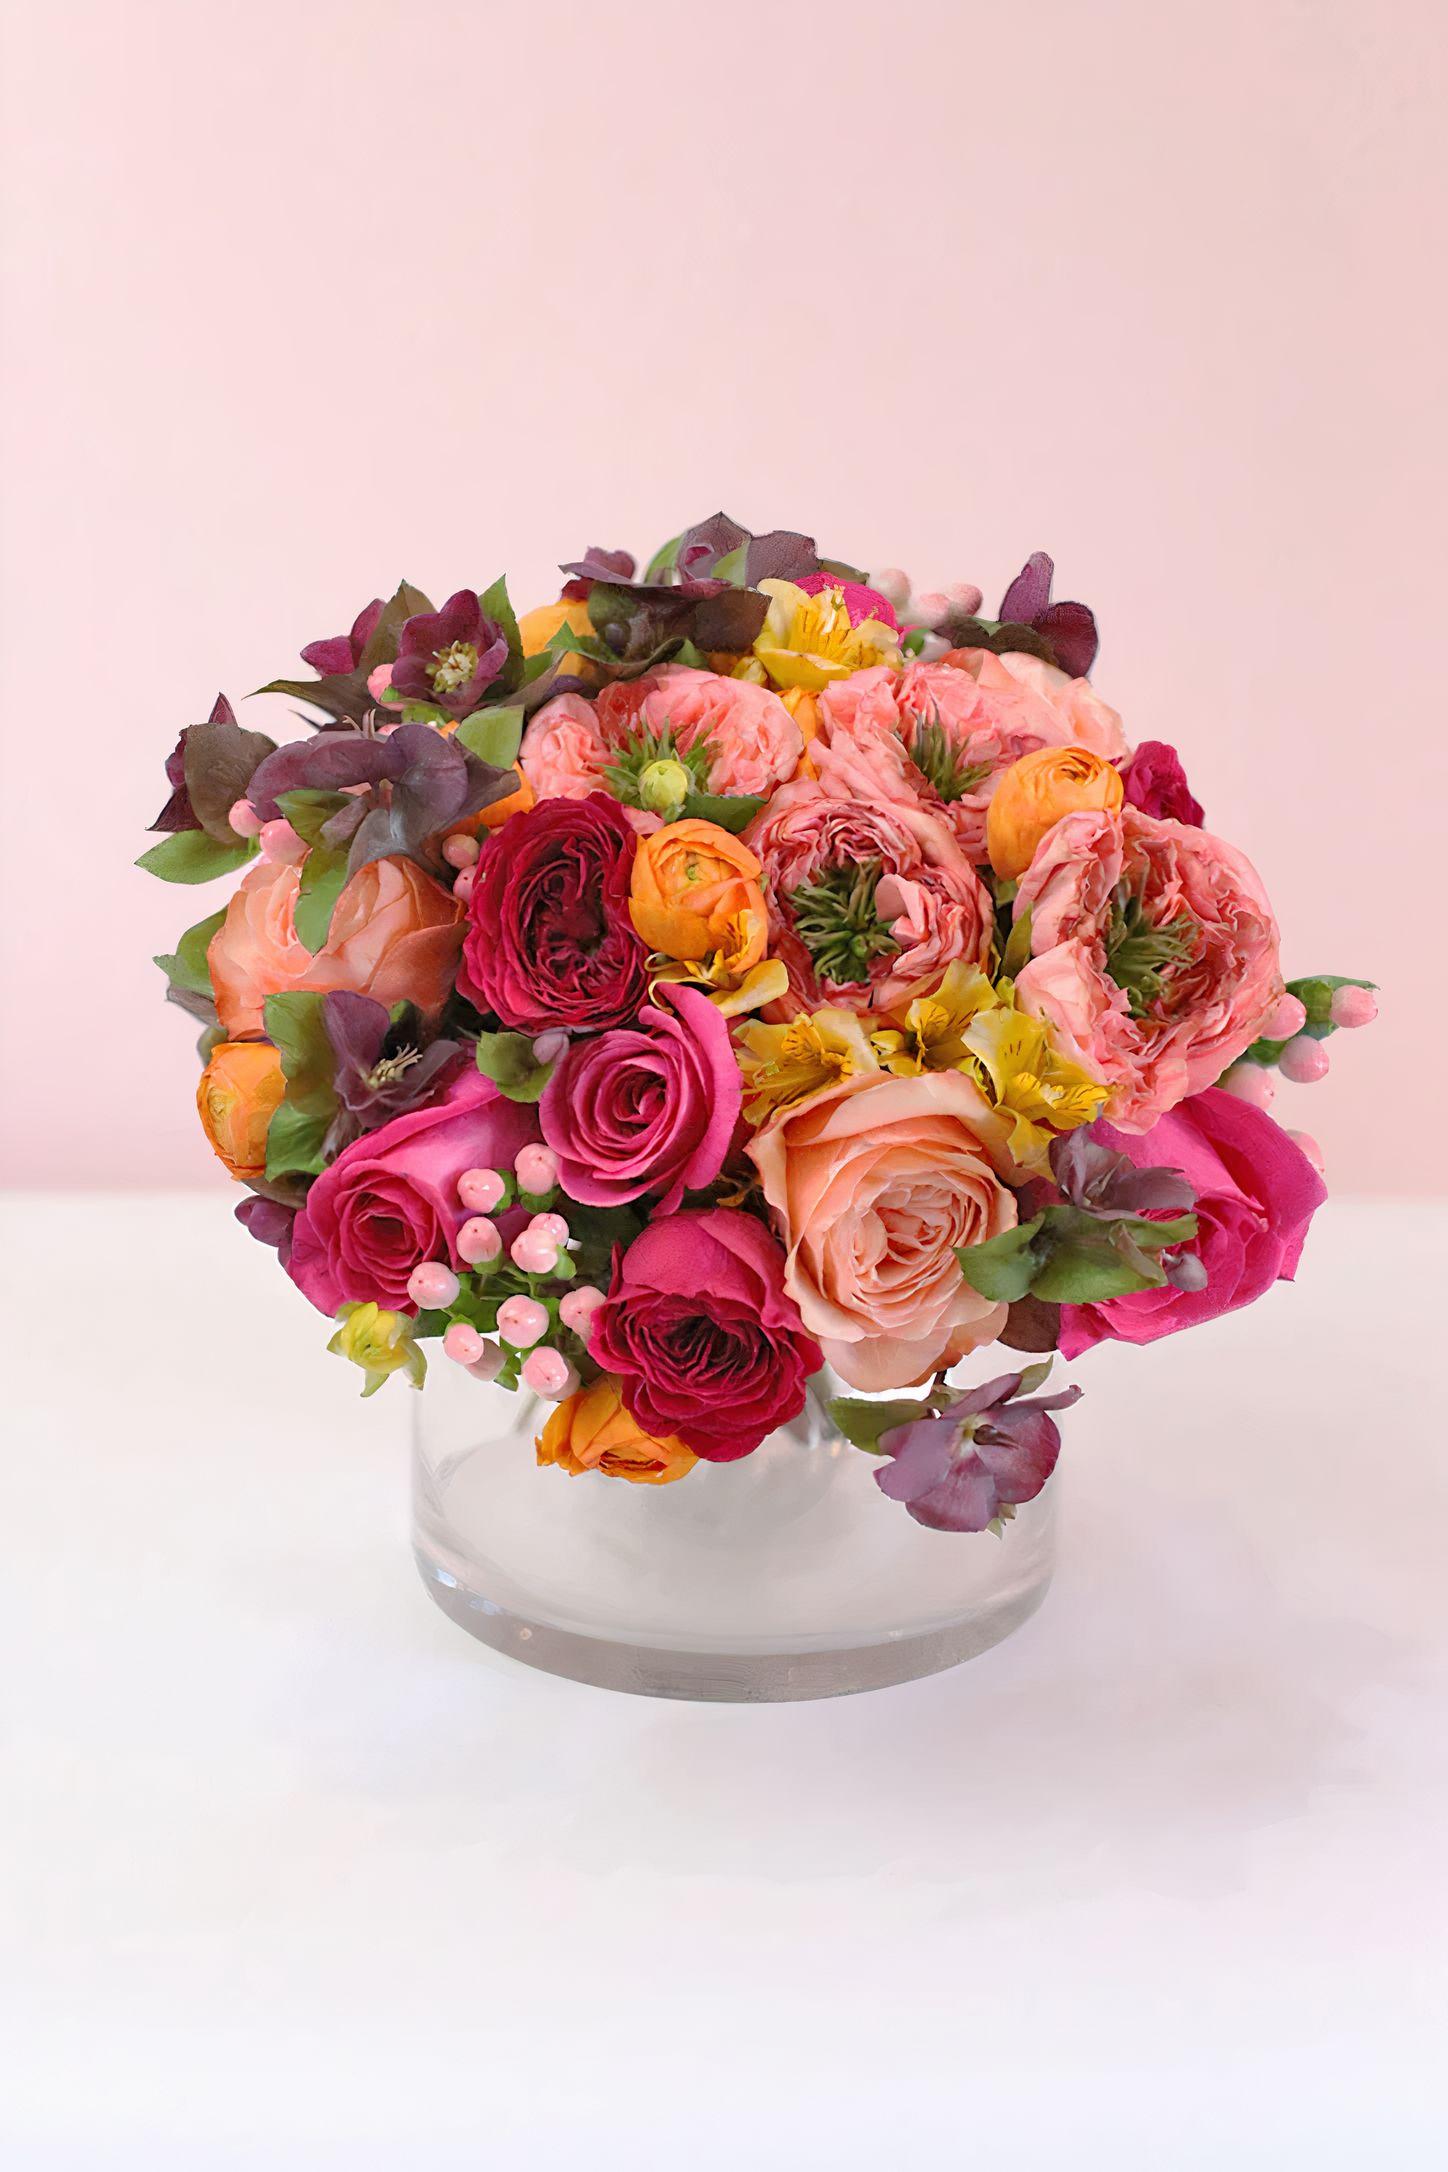 It’s Wednesday, Time to Treat Yourself To Flowers